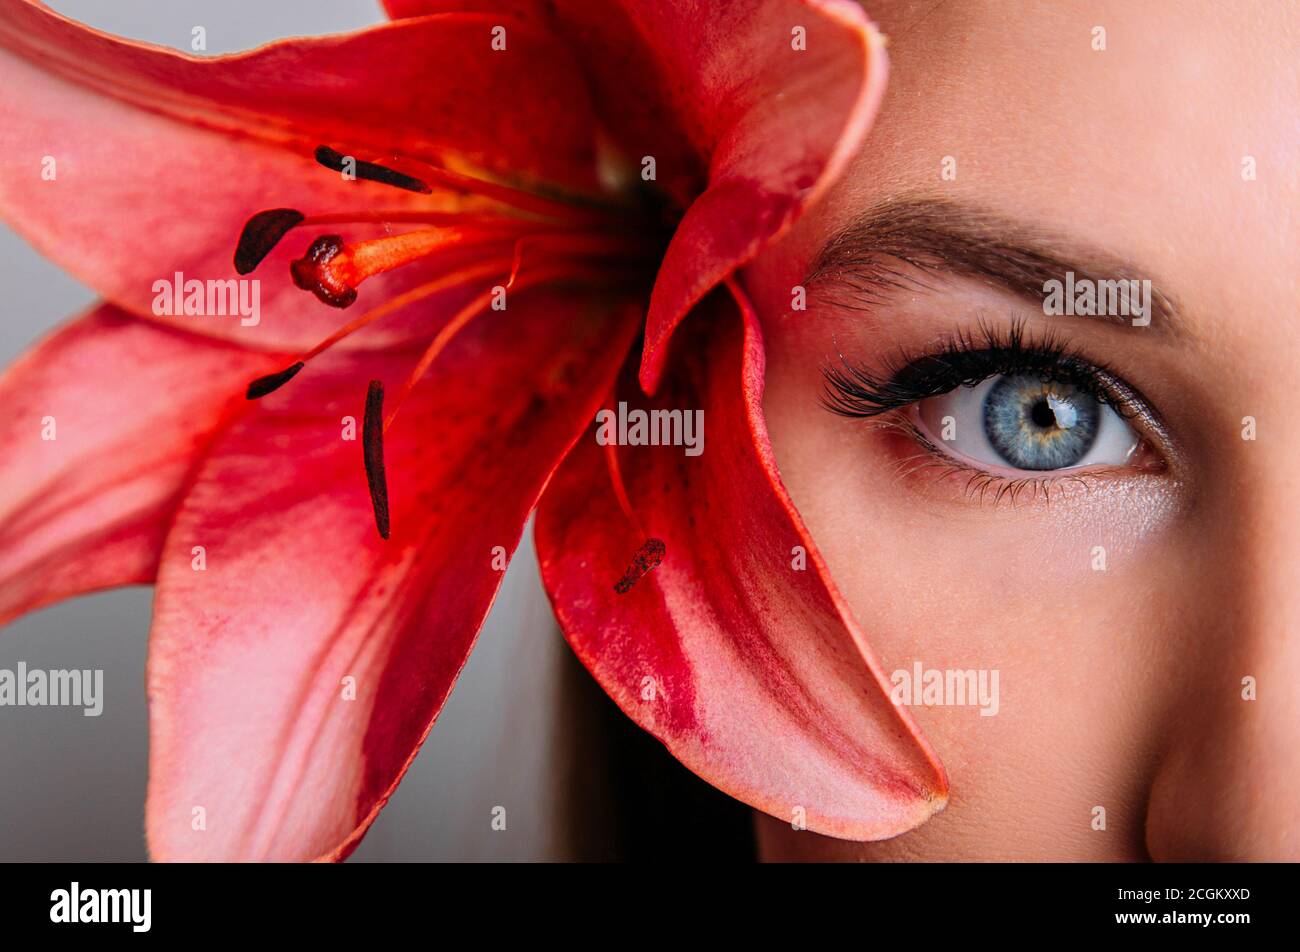 A beautiful eye with extended eyelashes. Fashion girl with lily flower Stock Photo